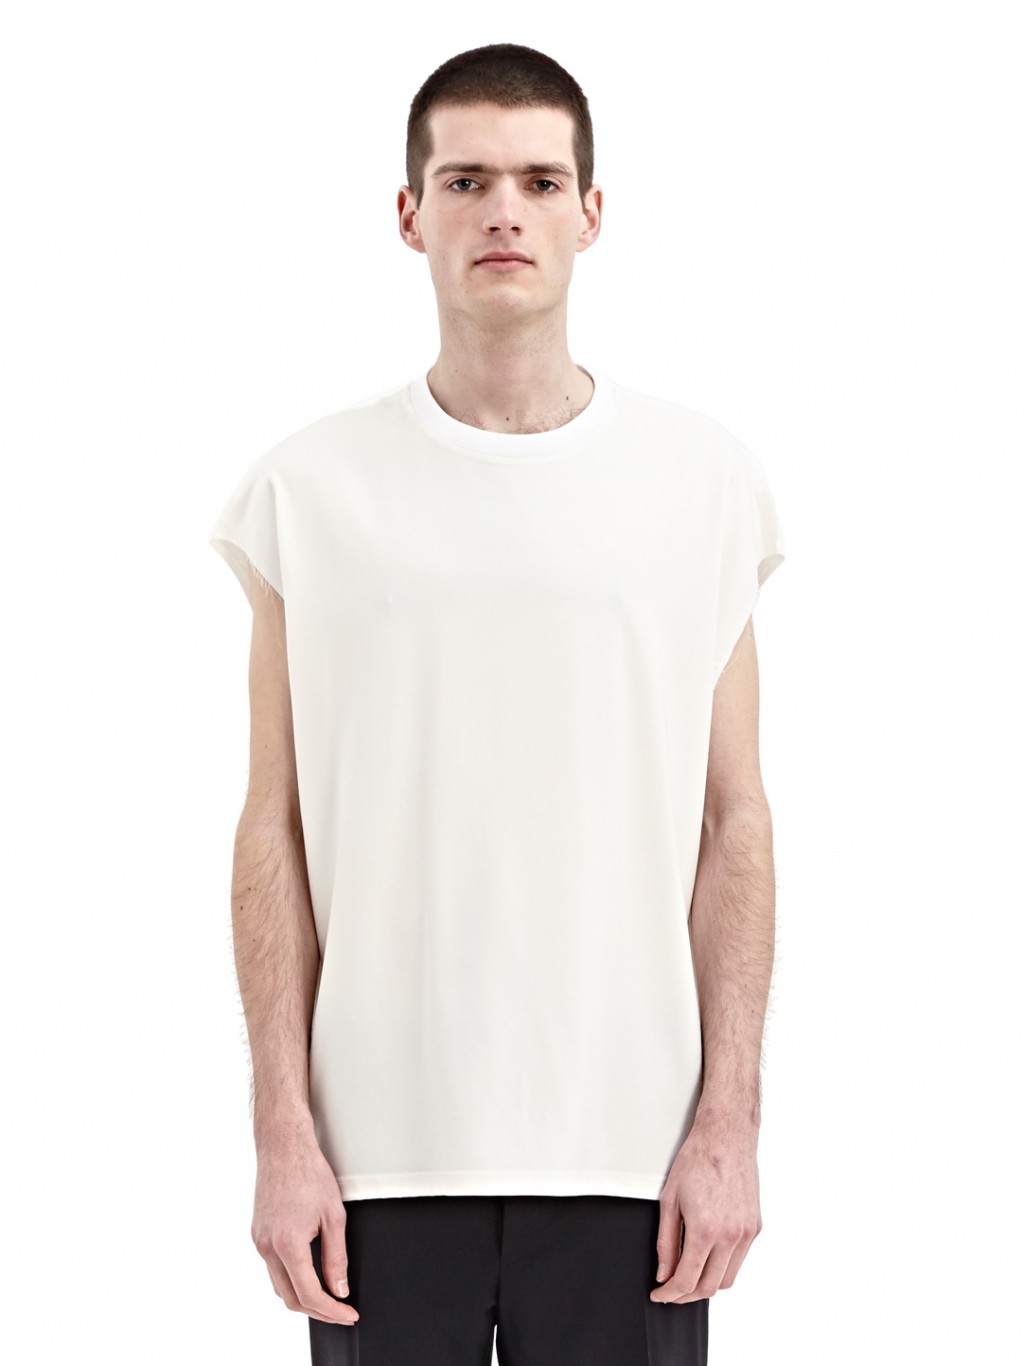 Shop Lanvin Simple Spring 2015 Men's T-Shirt Styles – The Fashionisto